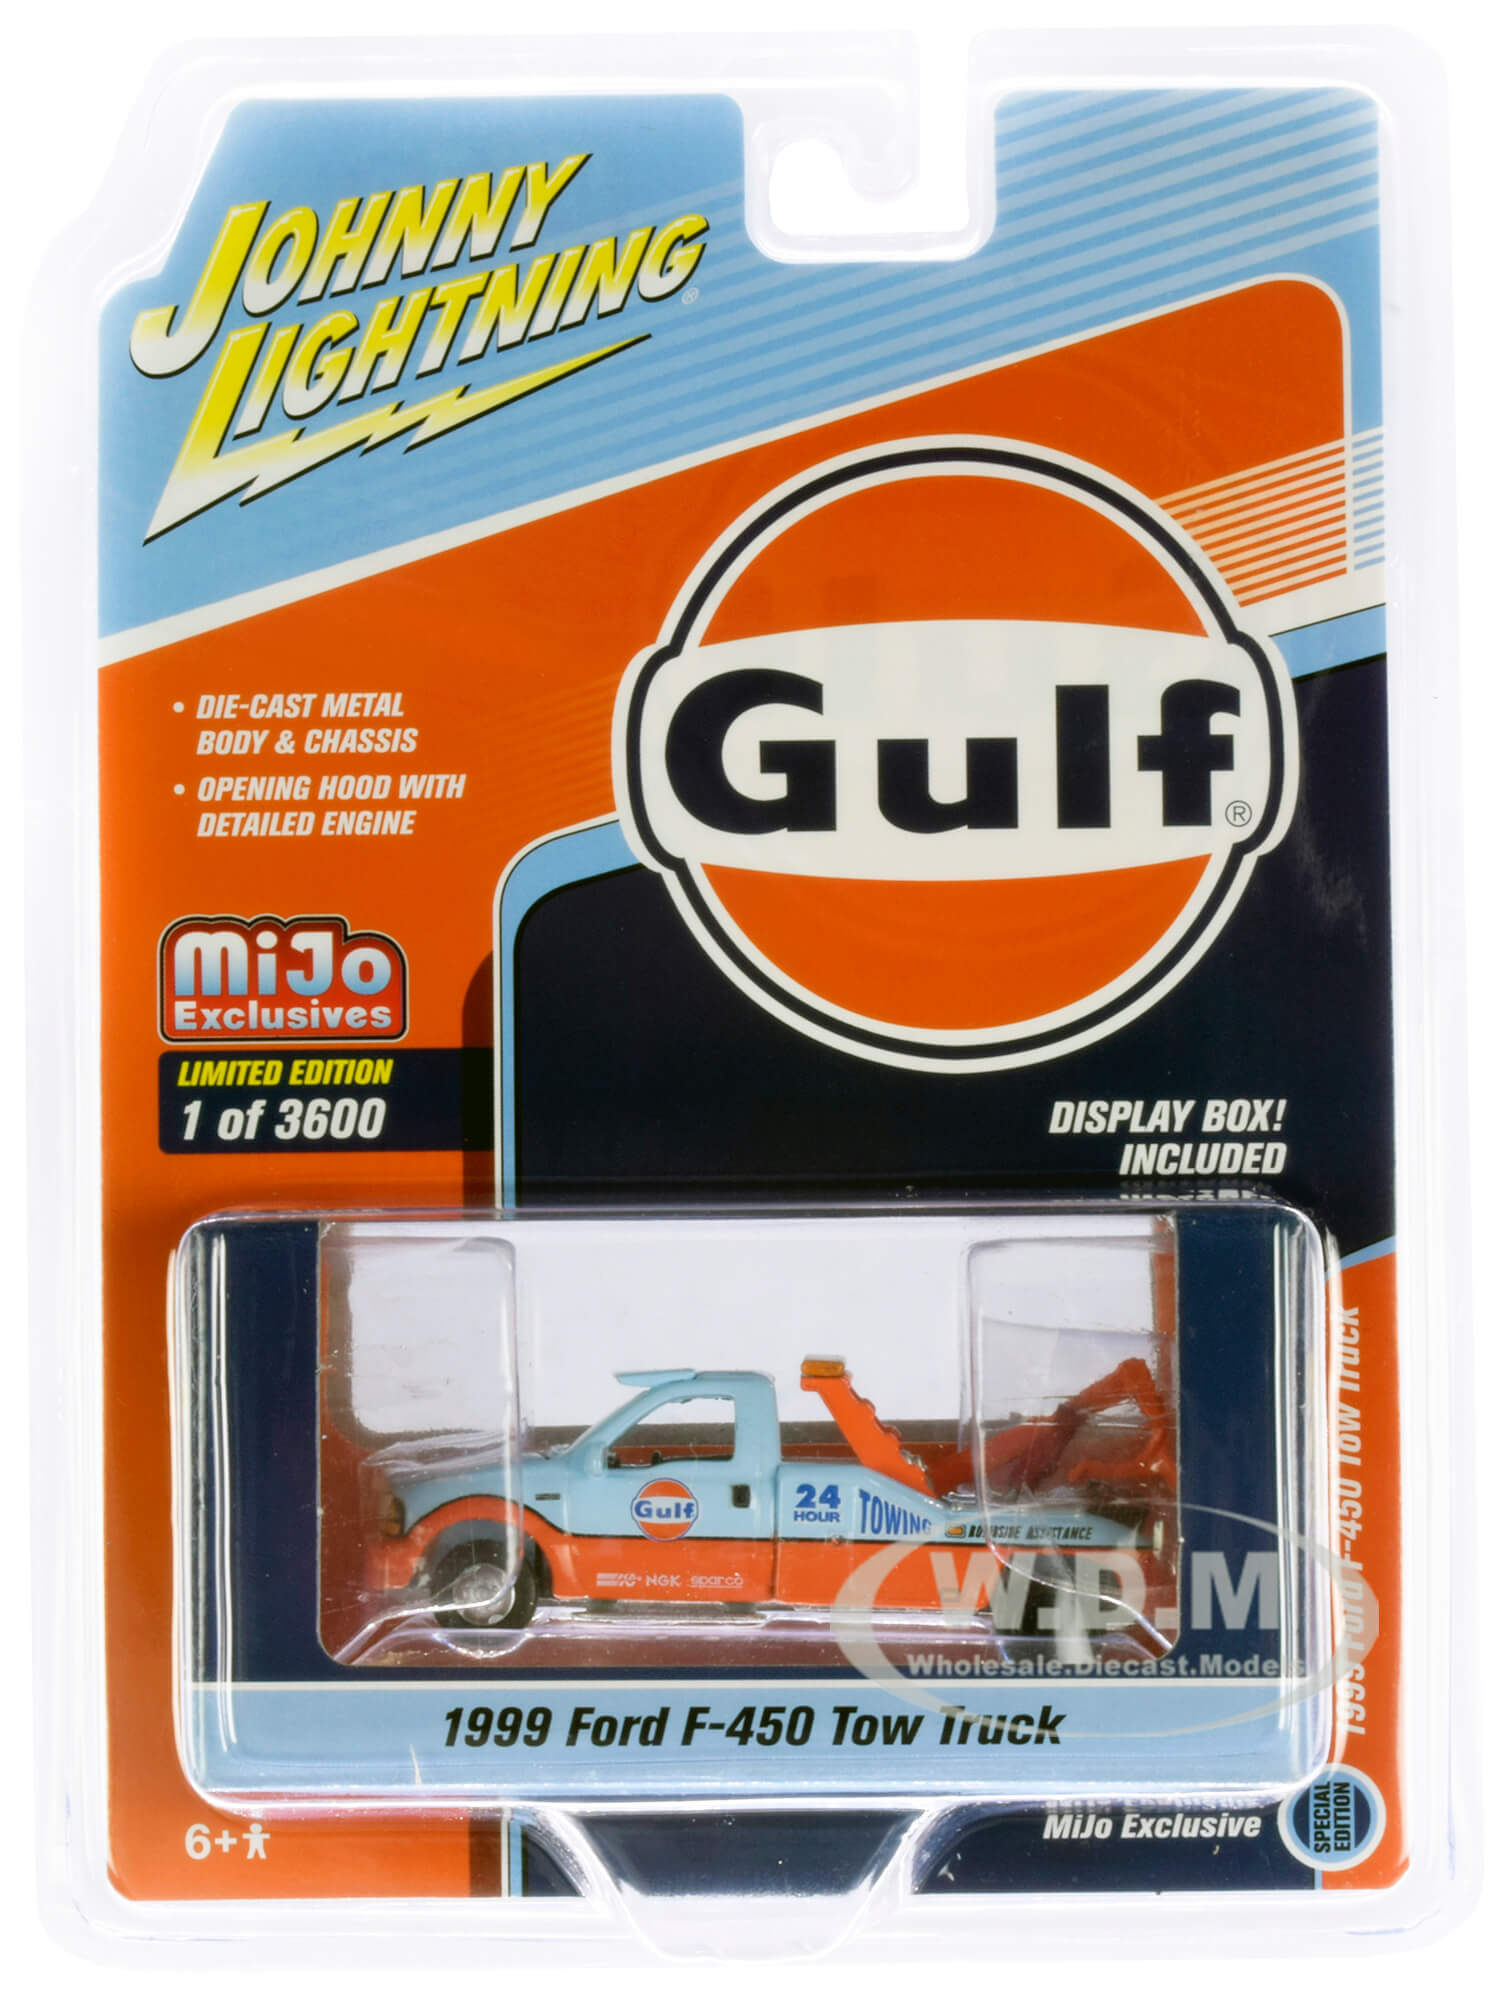 1999 Ford F-450 Tow Truck "gulf Oil" Orange And Light Blue Limited Edition To 3600 Pieces Worldwide 1/64 Diecast Model By Johnny Lightning